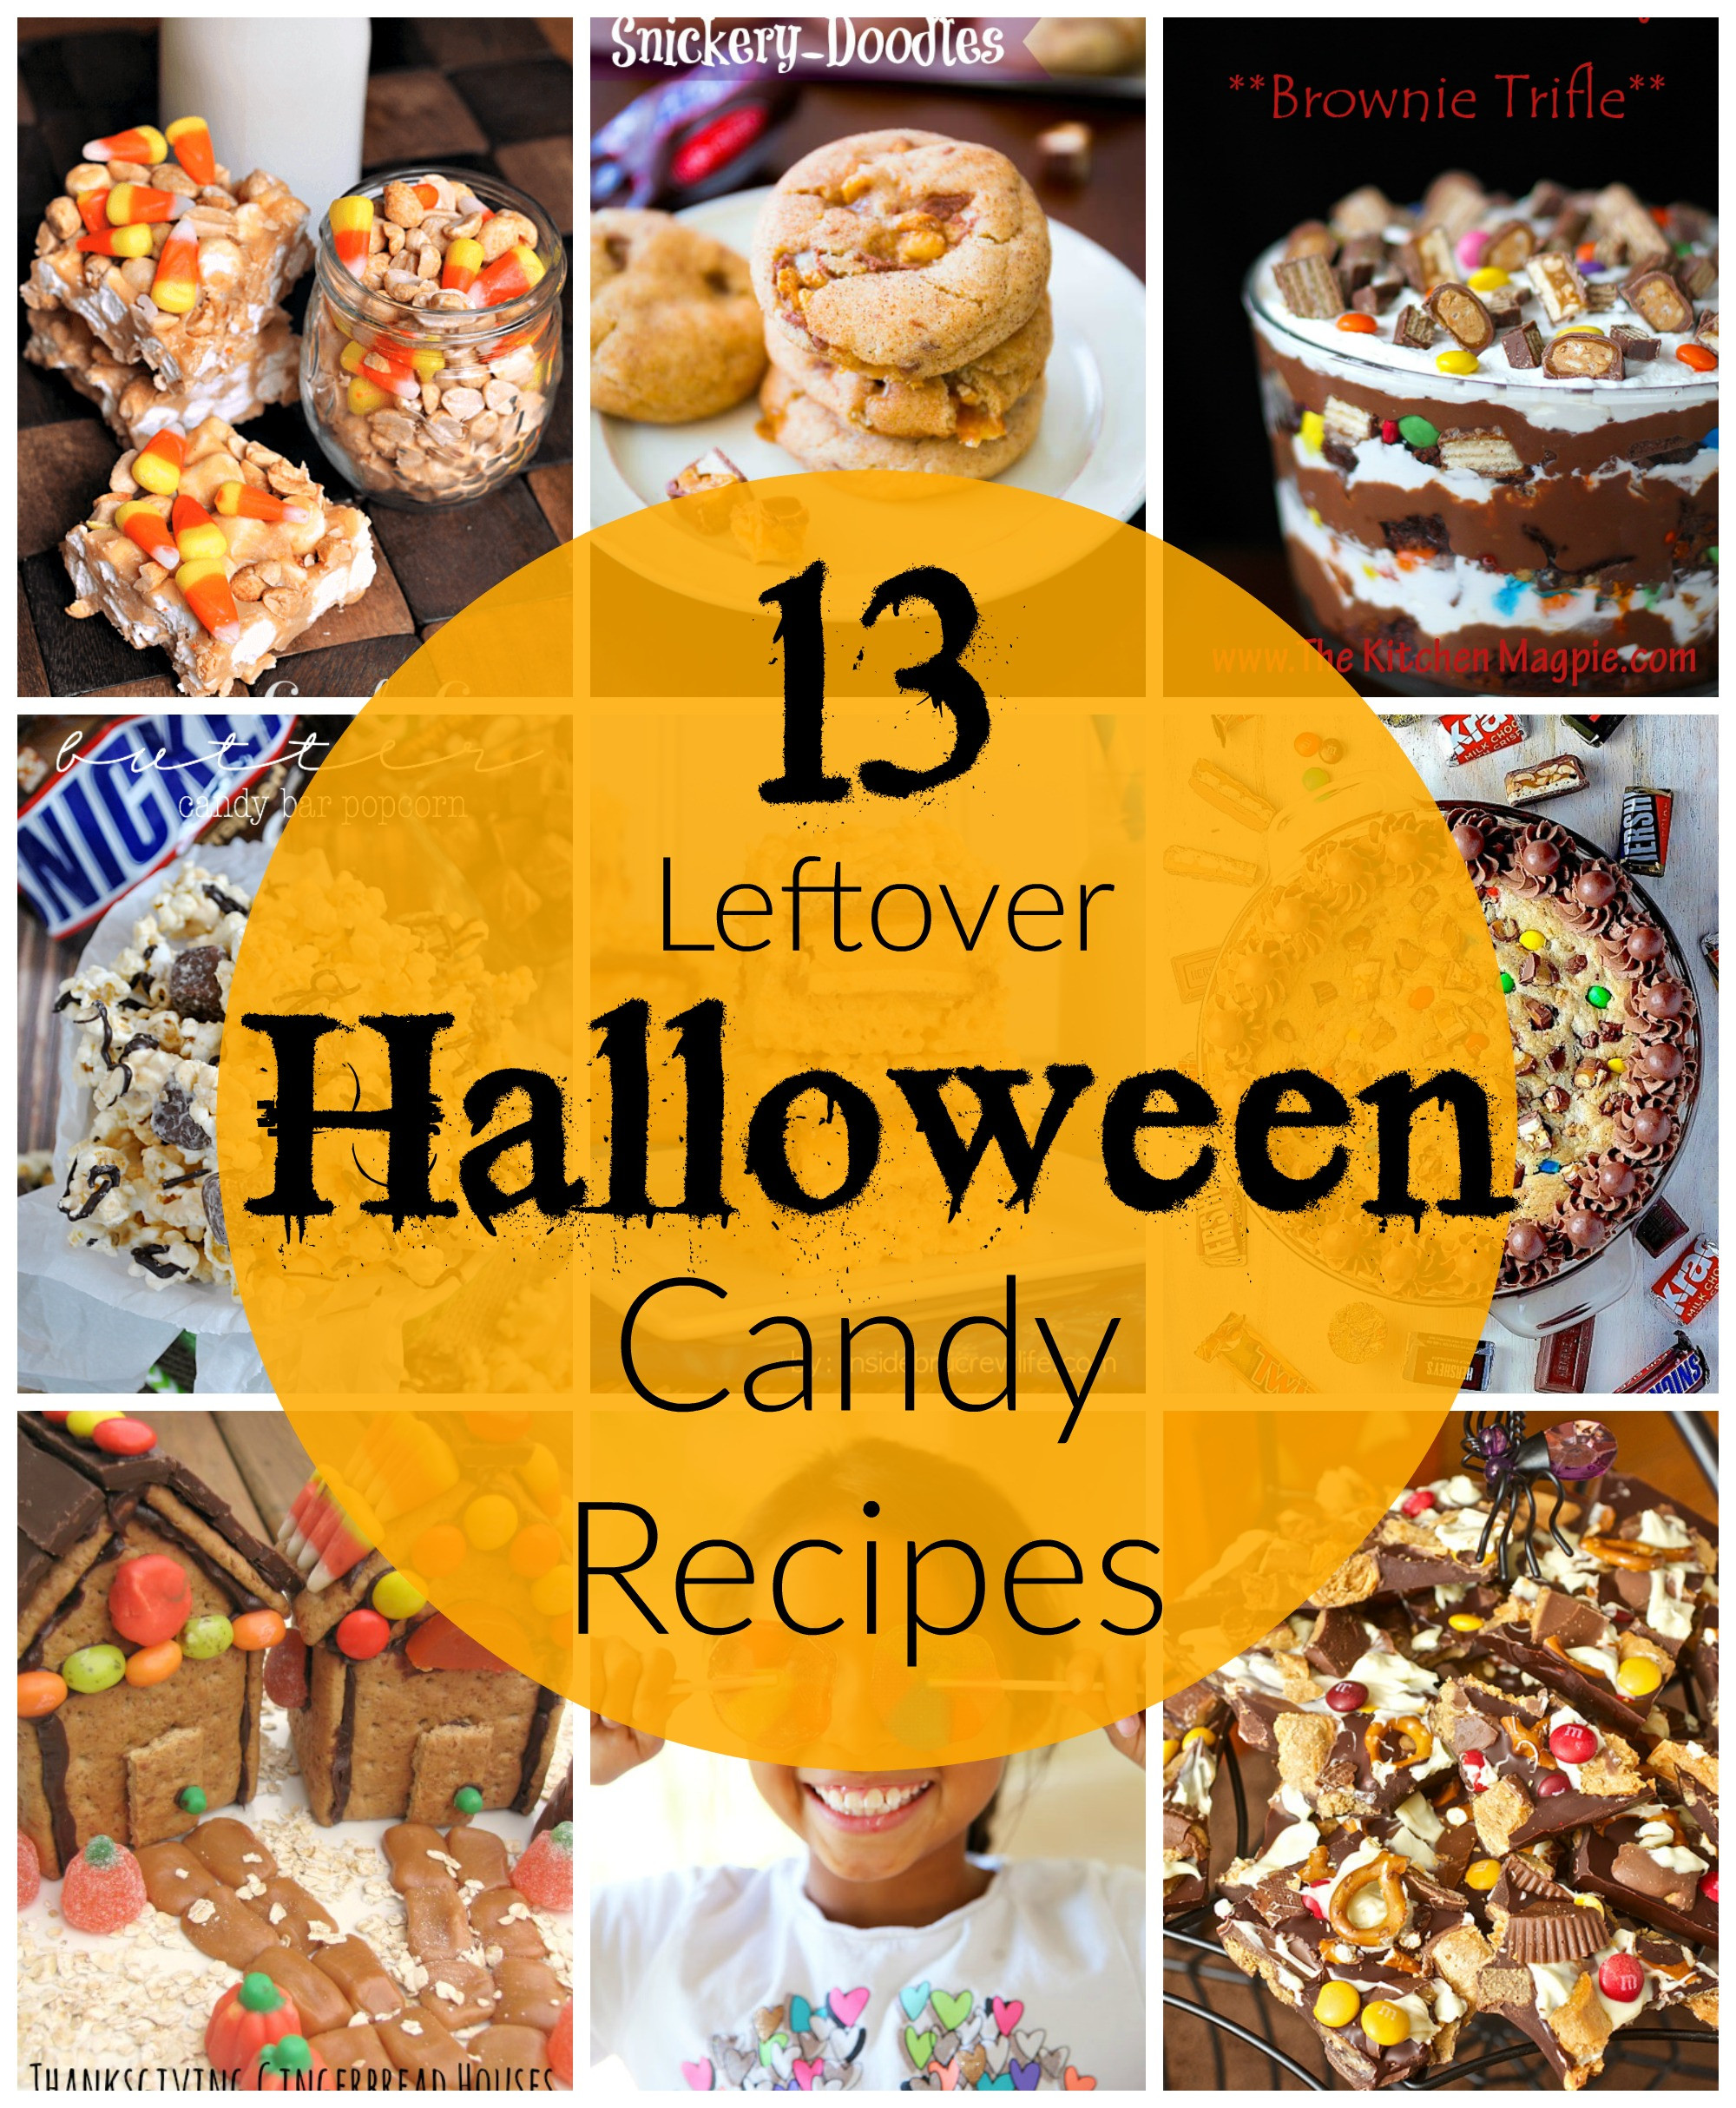 Leftover Halloween Candy Recipes
 13 Leftover Halloween Candy Recipes